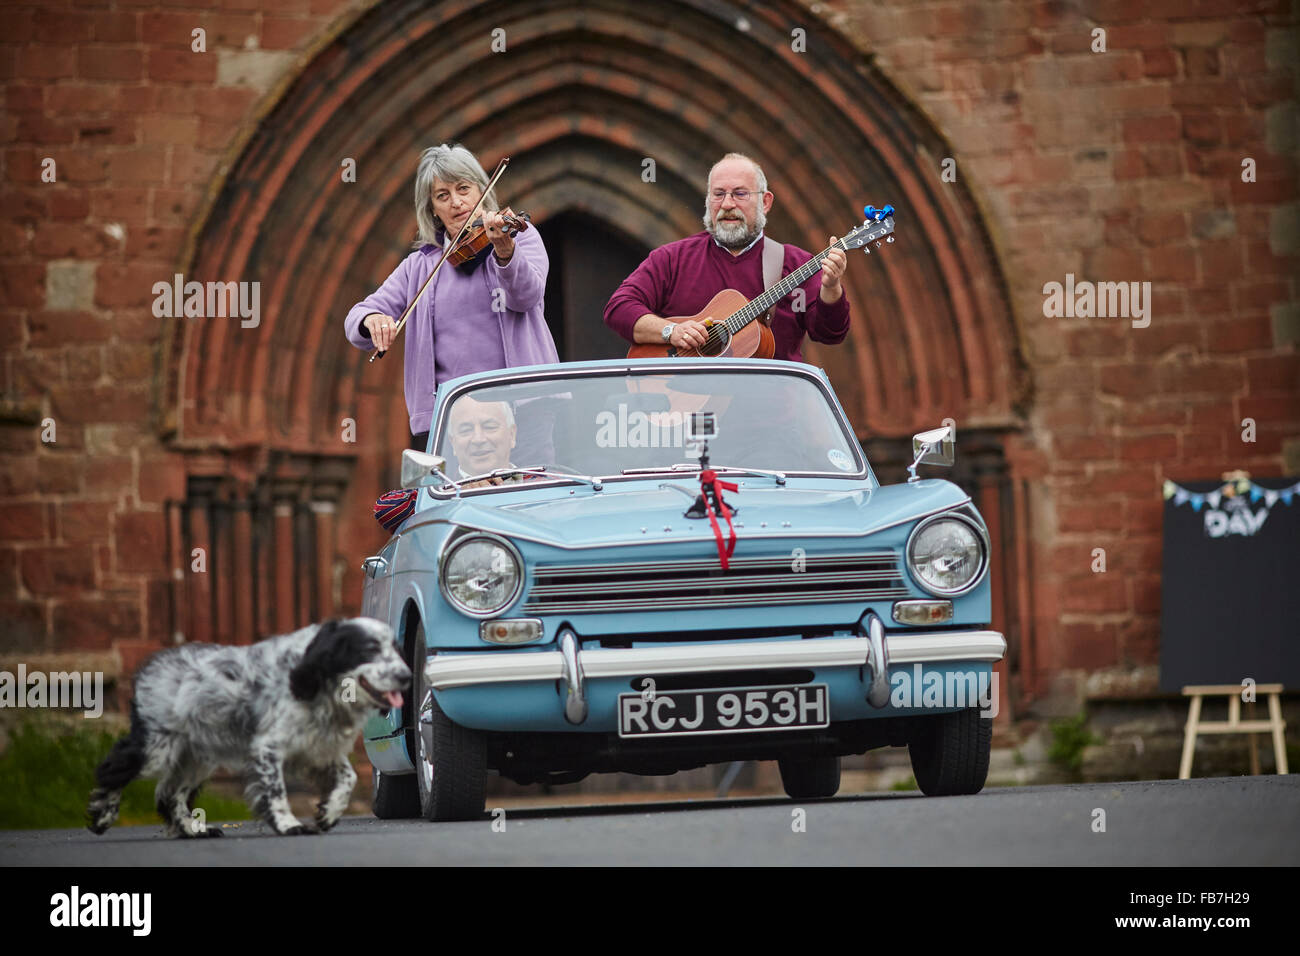 BBC Music day 'for the love of music'  Hadrian's Wall of Sound 2015 at Lanercost Priory Triumph Hearld convertible Violin duet M Stock Photo